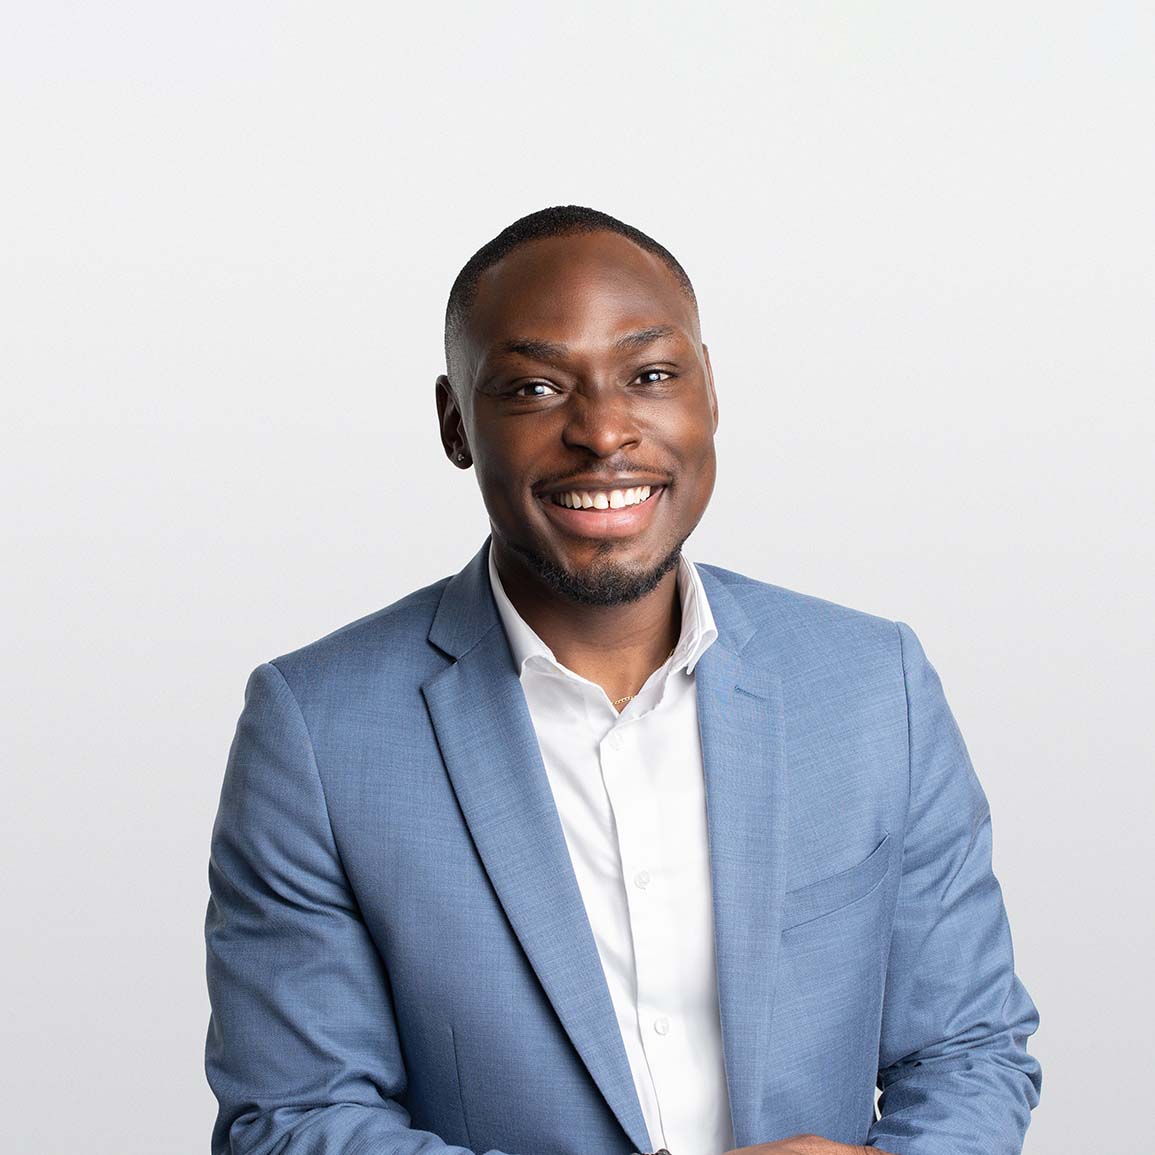 Image of Tope Temi financial advisor on white background